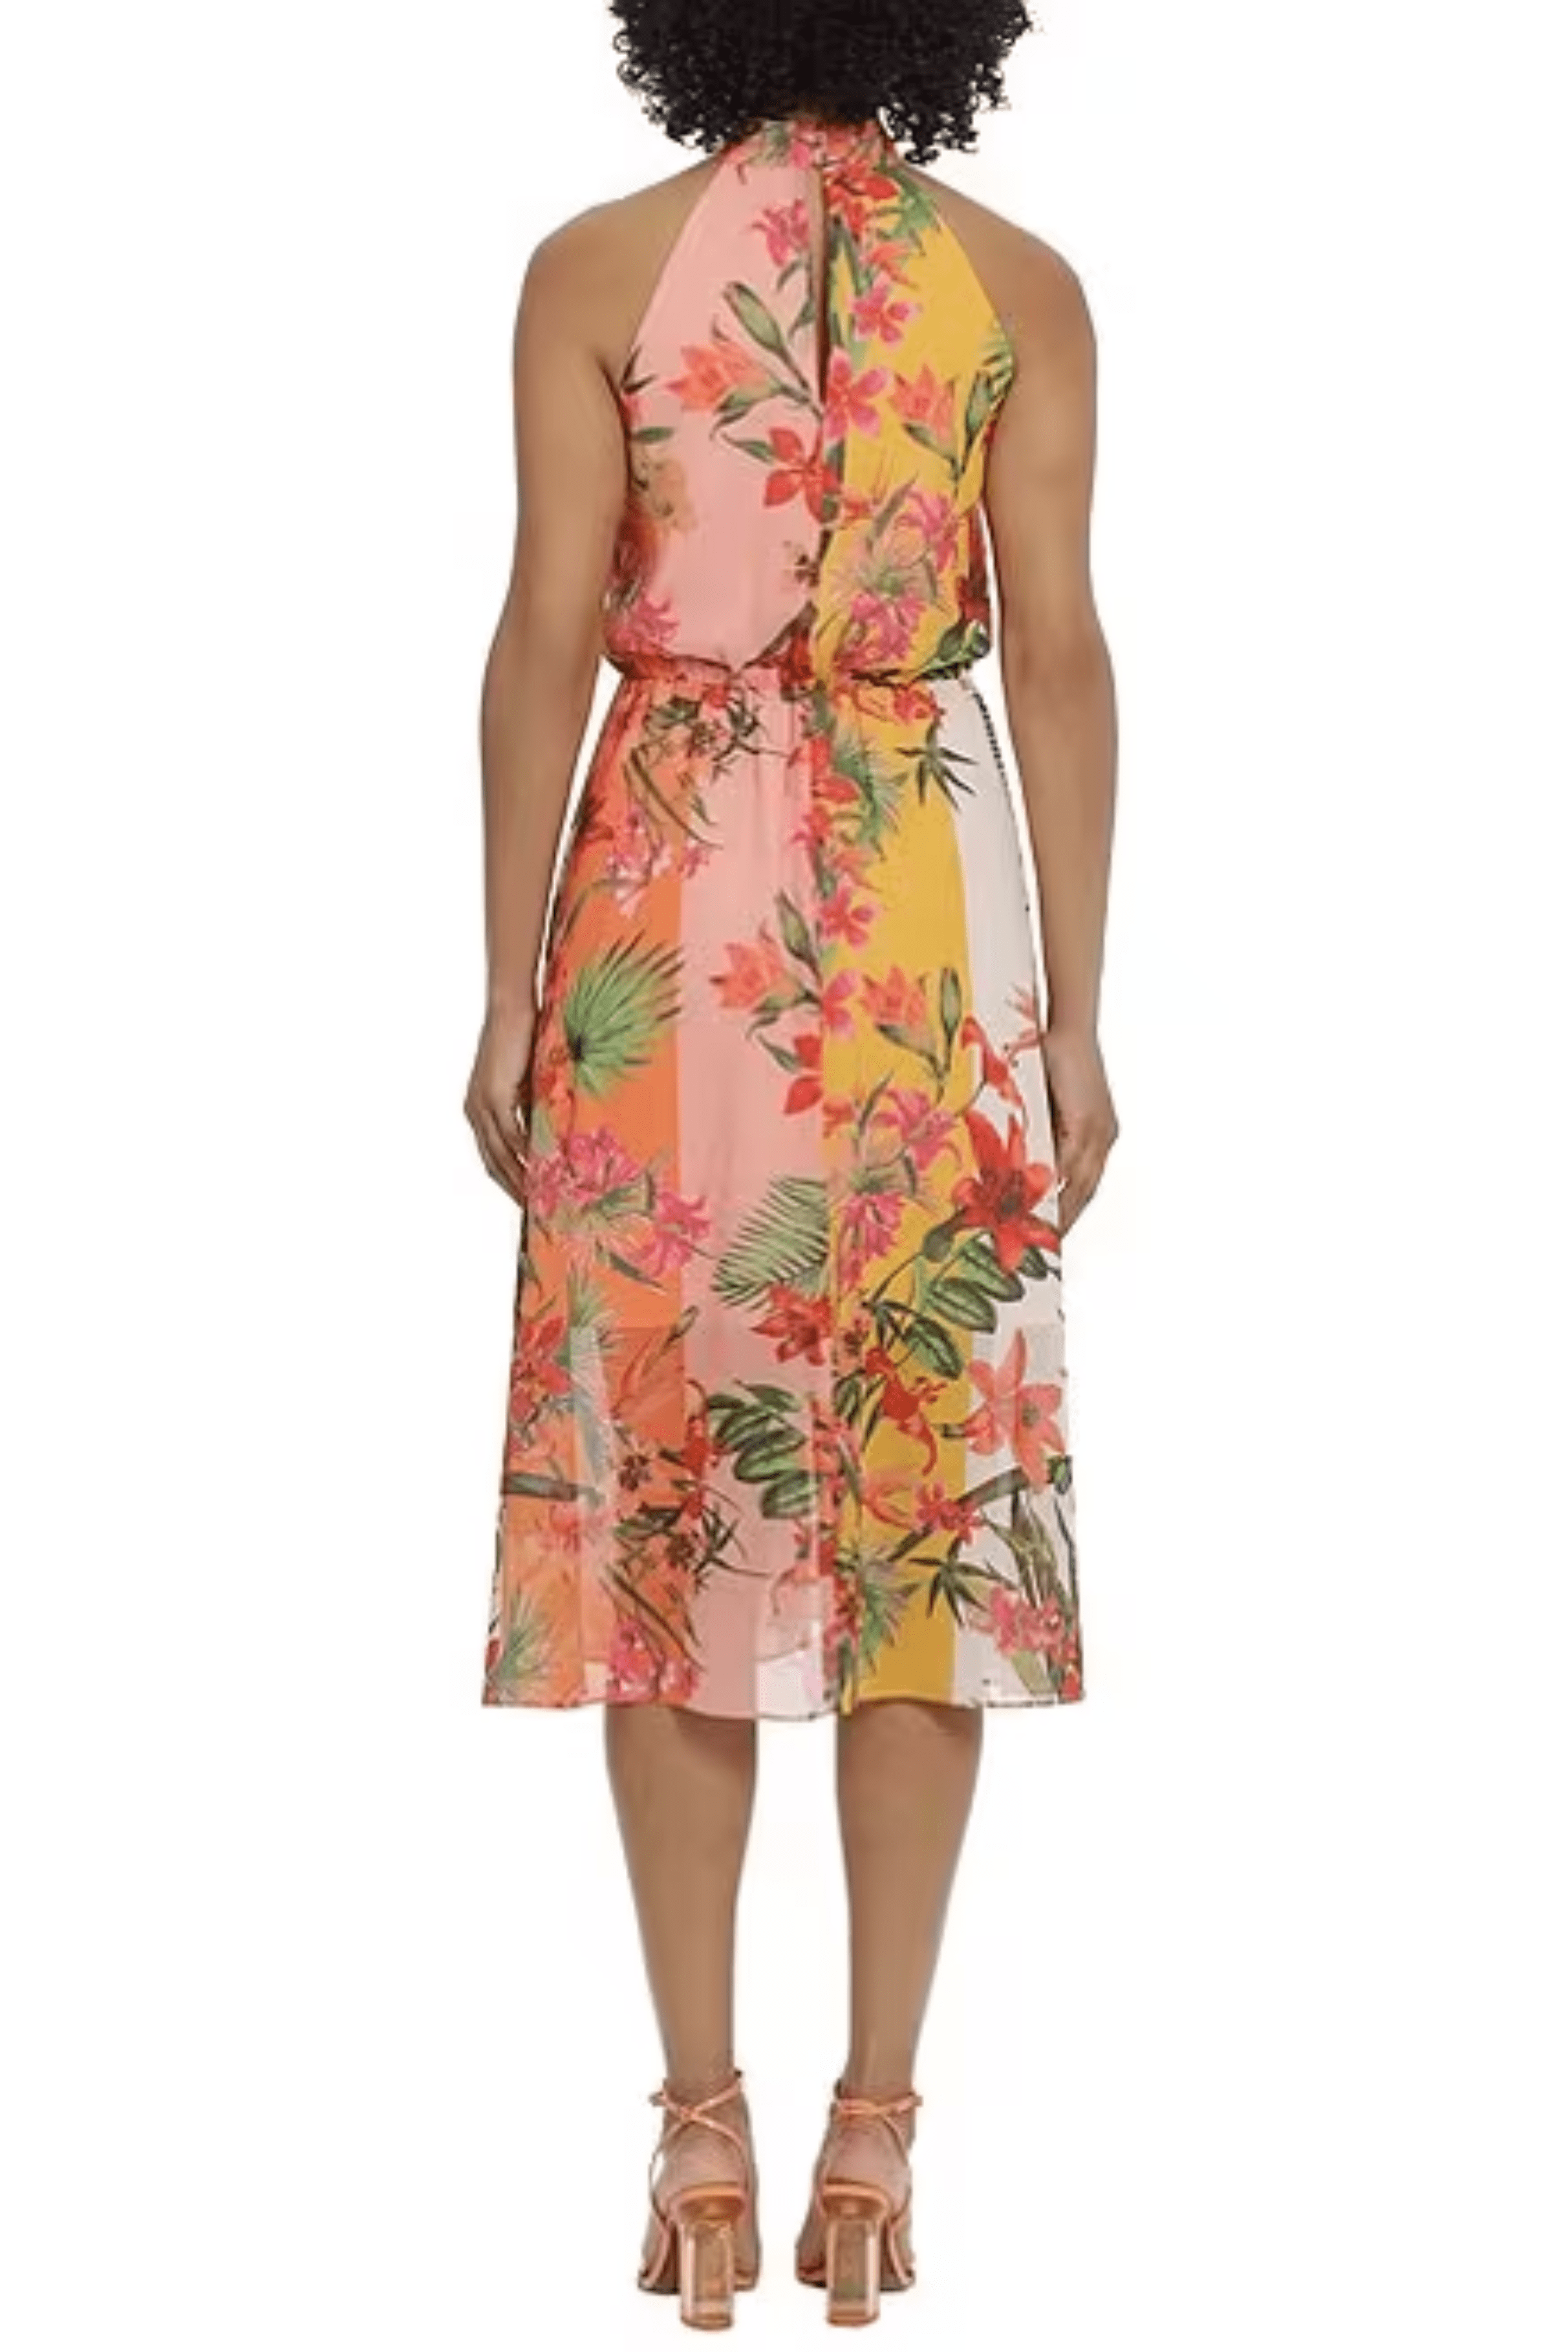 Maggy London, Maggy London G5640M - Halter Floral Printed Formal Dress